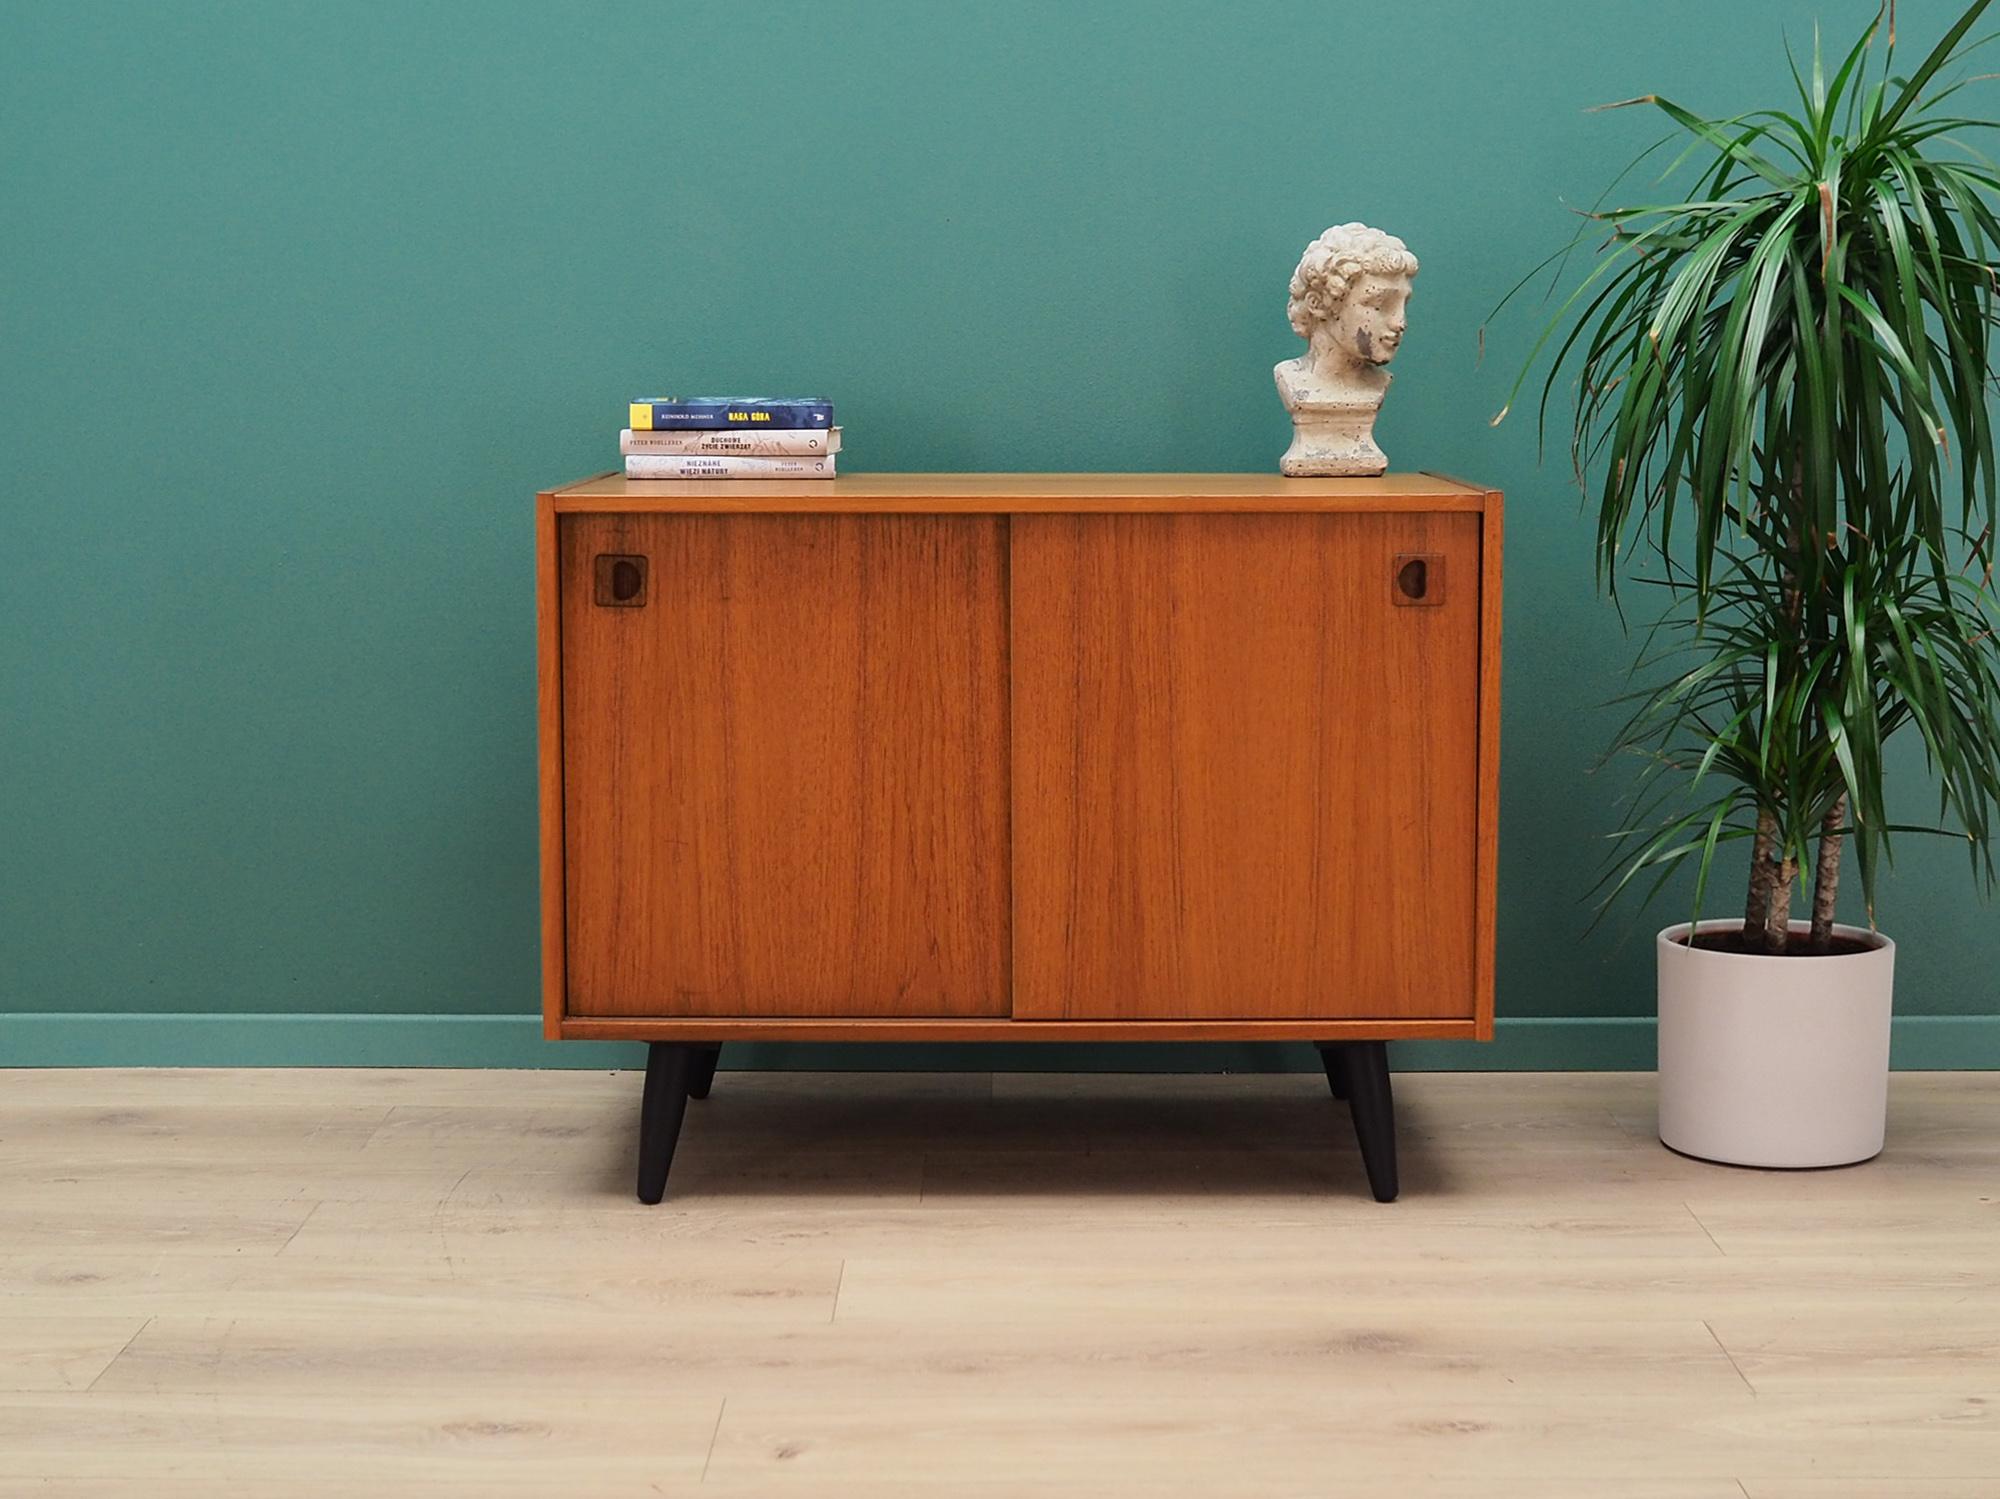 Brilliant 1960s-1970s teak cabinet, Minimalist form, Danish design. The furniture is covered with teak veneer, legs are made of solid wood. The furniture has two sliding doors, behind which there is one shelf. Preserved in good condition (small